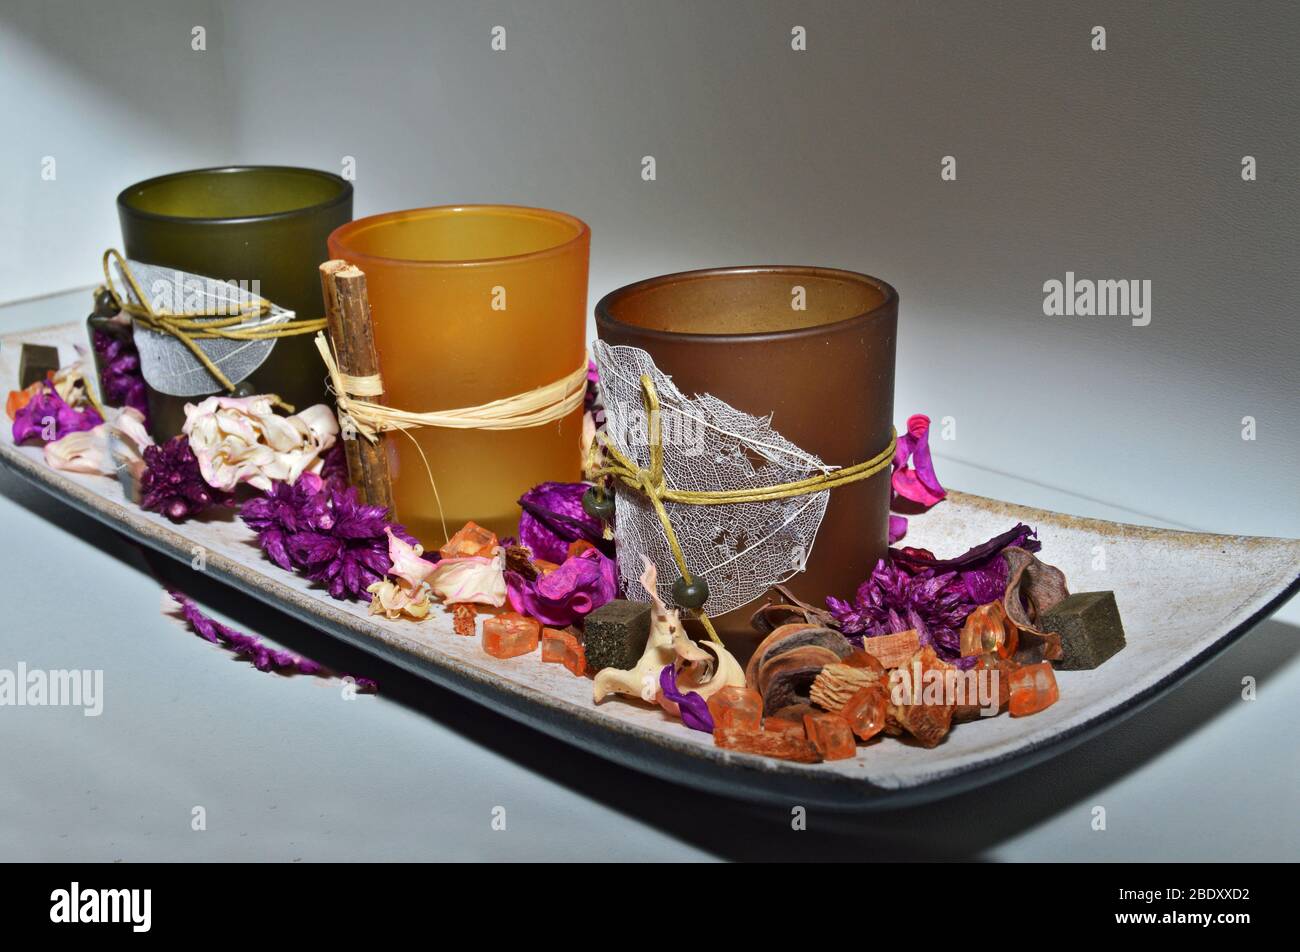 Closeup of display with dried flowers and aromatic candles on a platter, display poupourri with orange, purple and green theme, ideas for interior dec Stock Photo